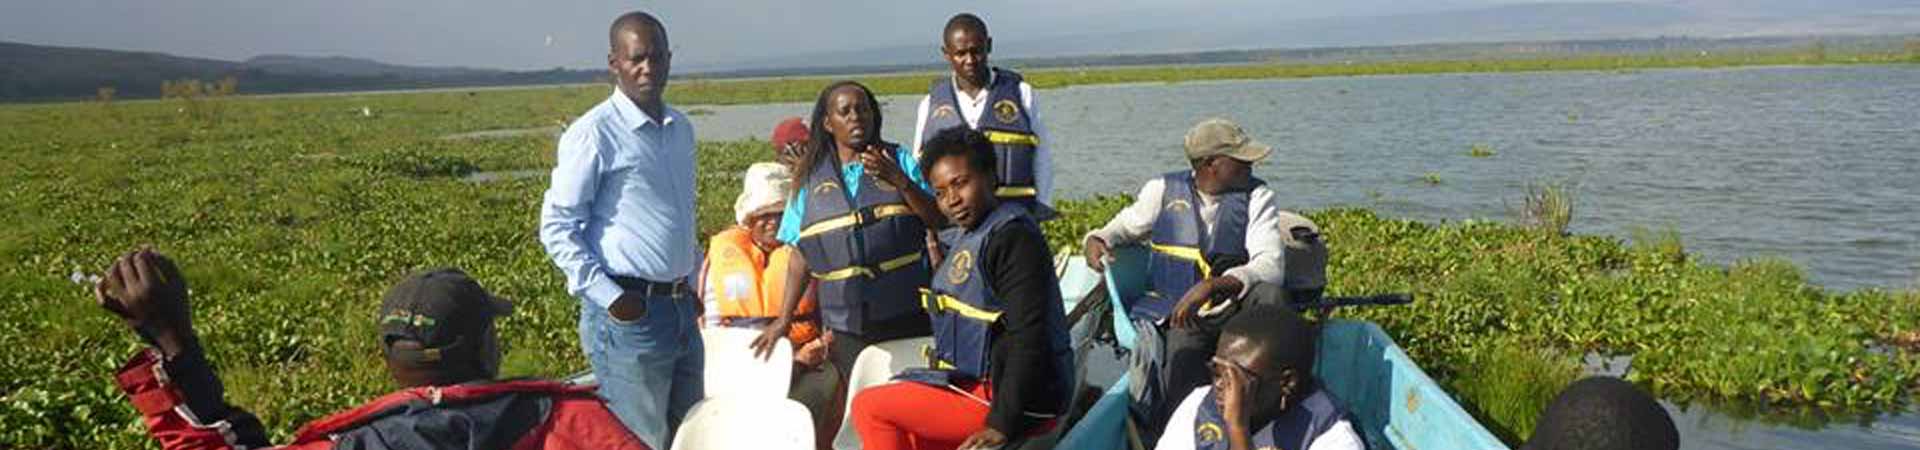 Project partners in Tanzania discussing farming of freshwater fish